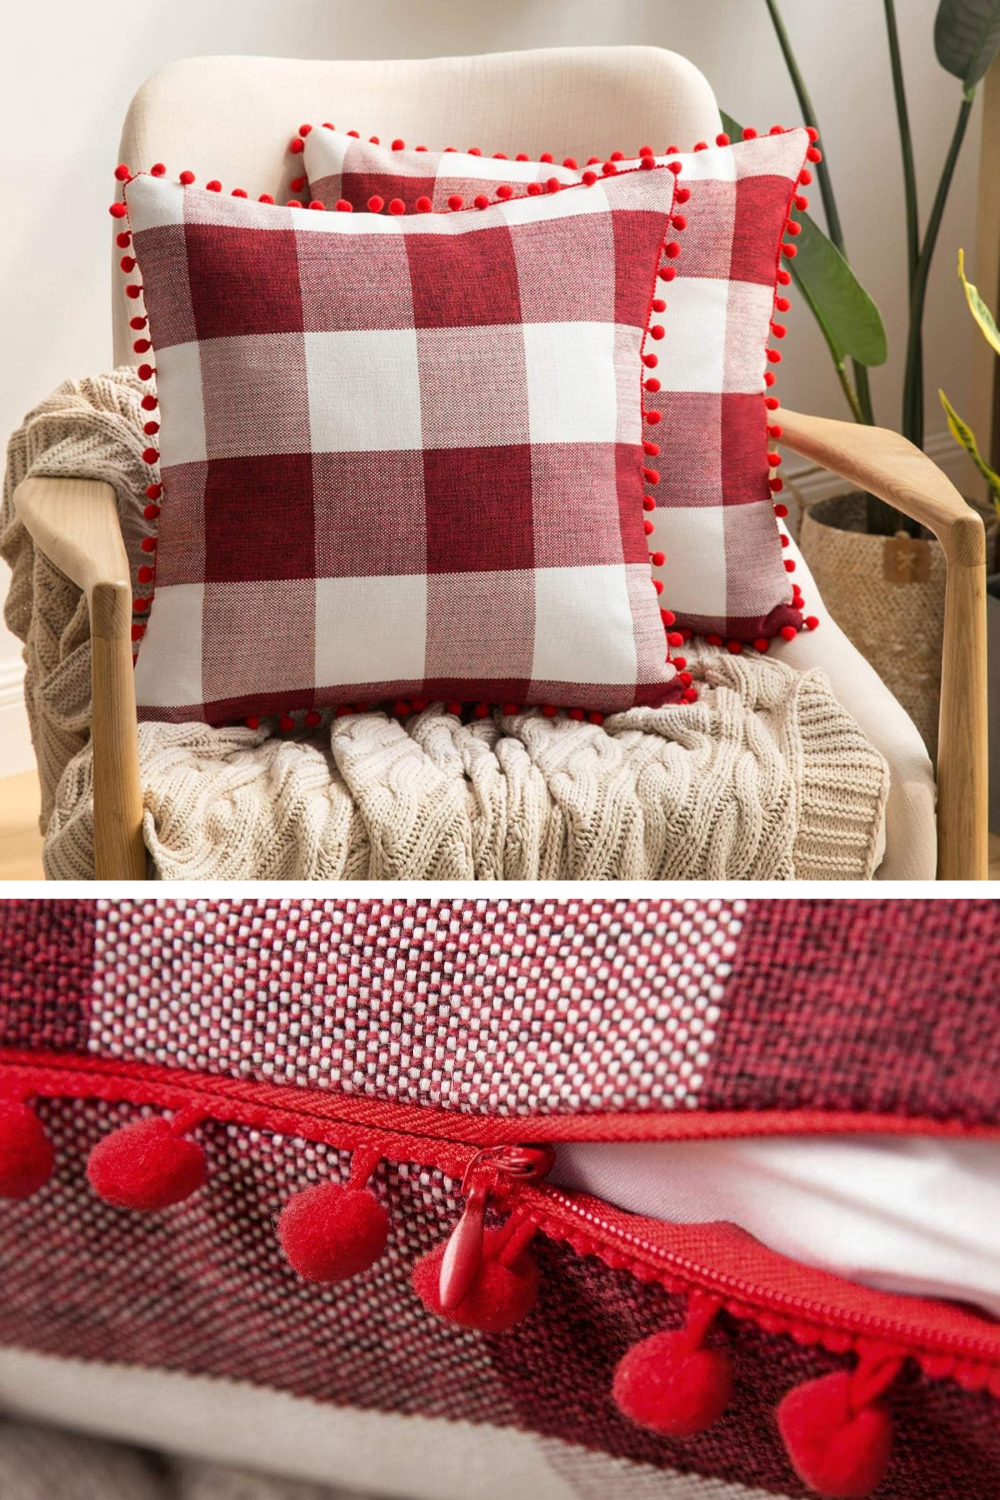 Set of 2 Retro Farmhouse Buffalo Plaid Check Pillow Cases with Pom-poms Christmas Decorative Throw Pillow Covers Cushion Case for Sofa Couch 18x18 Inch Red and White